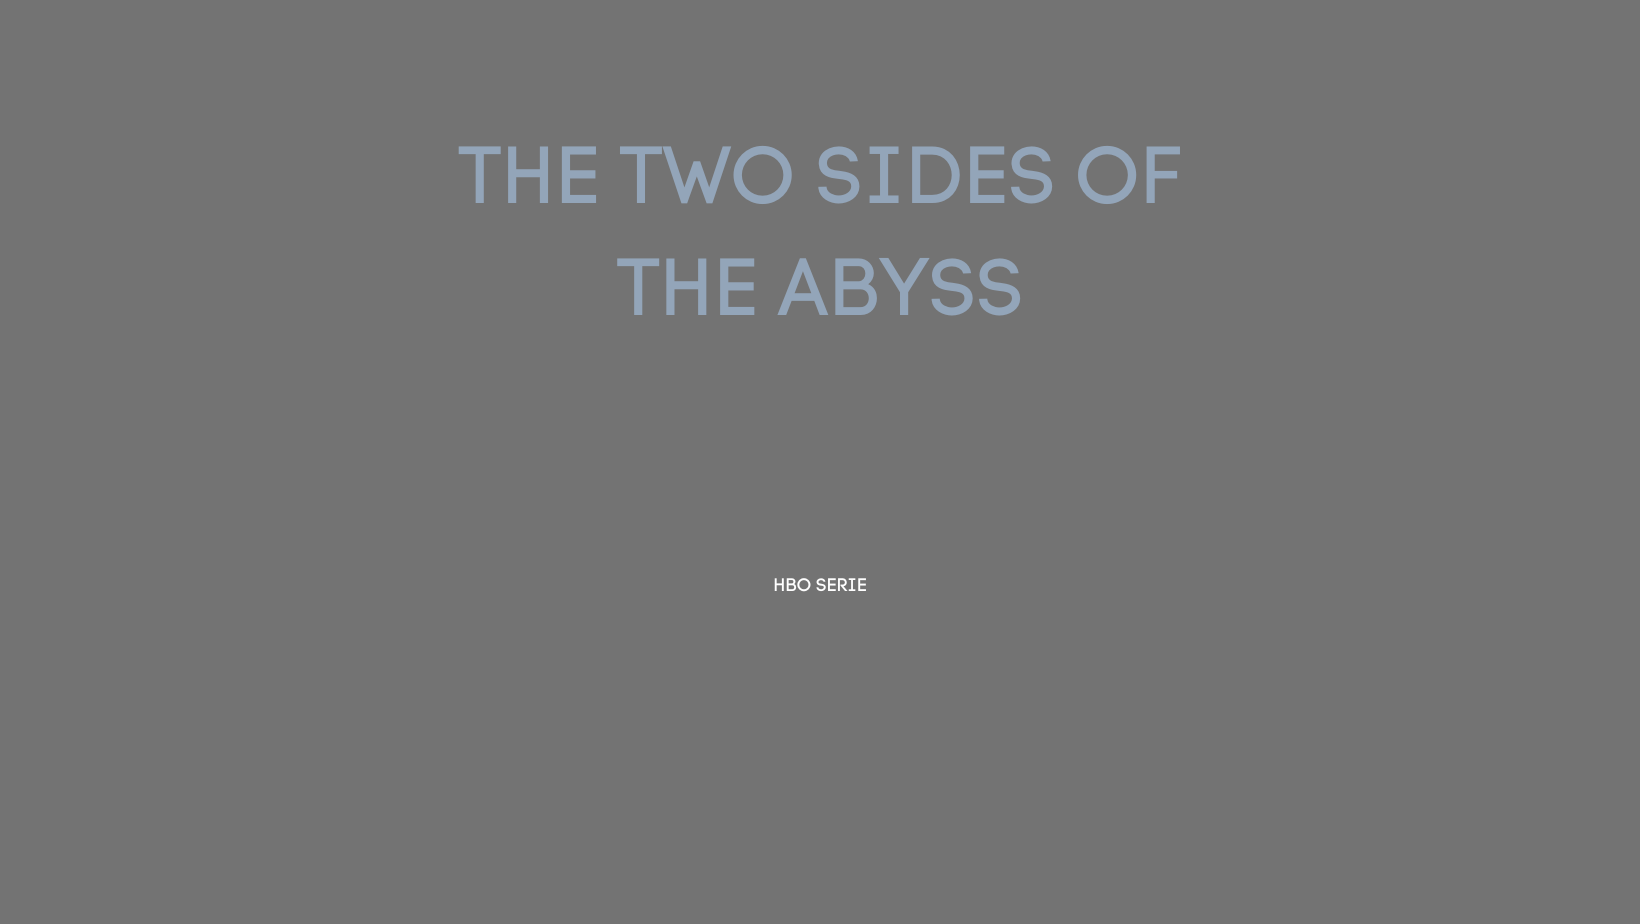 HBO: THE TWO SIDES OF THE ABYSS